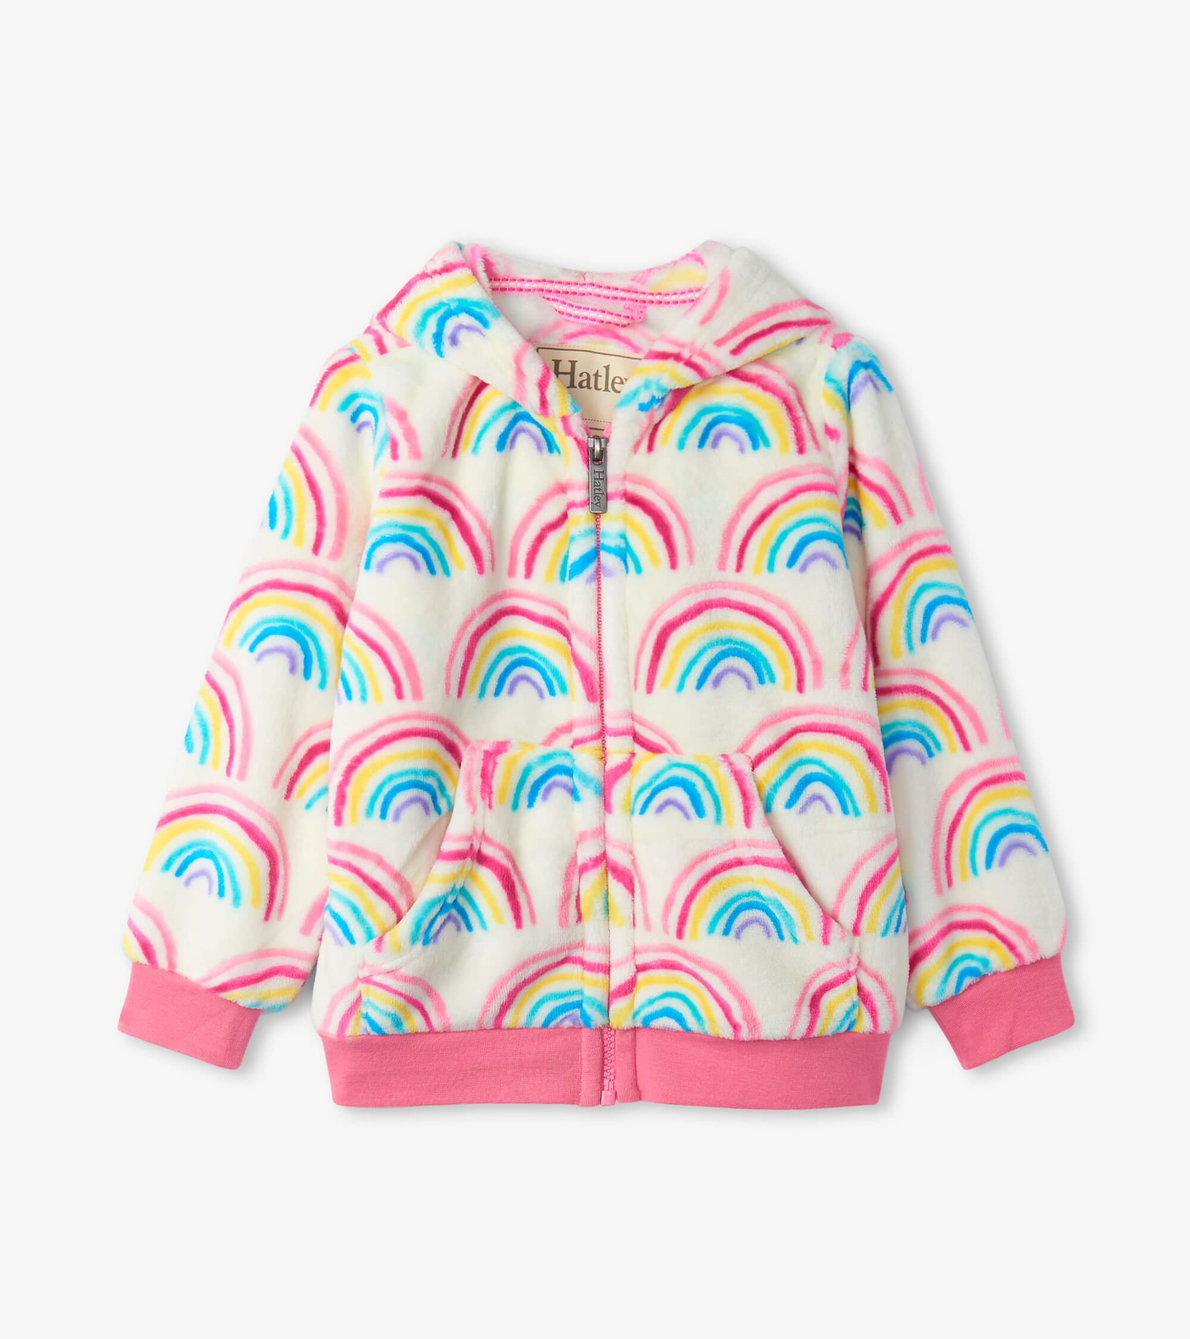 View larger image of Pretty Rainbows fuzzy fleece hooded jacket